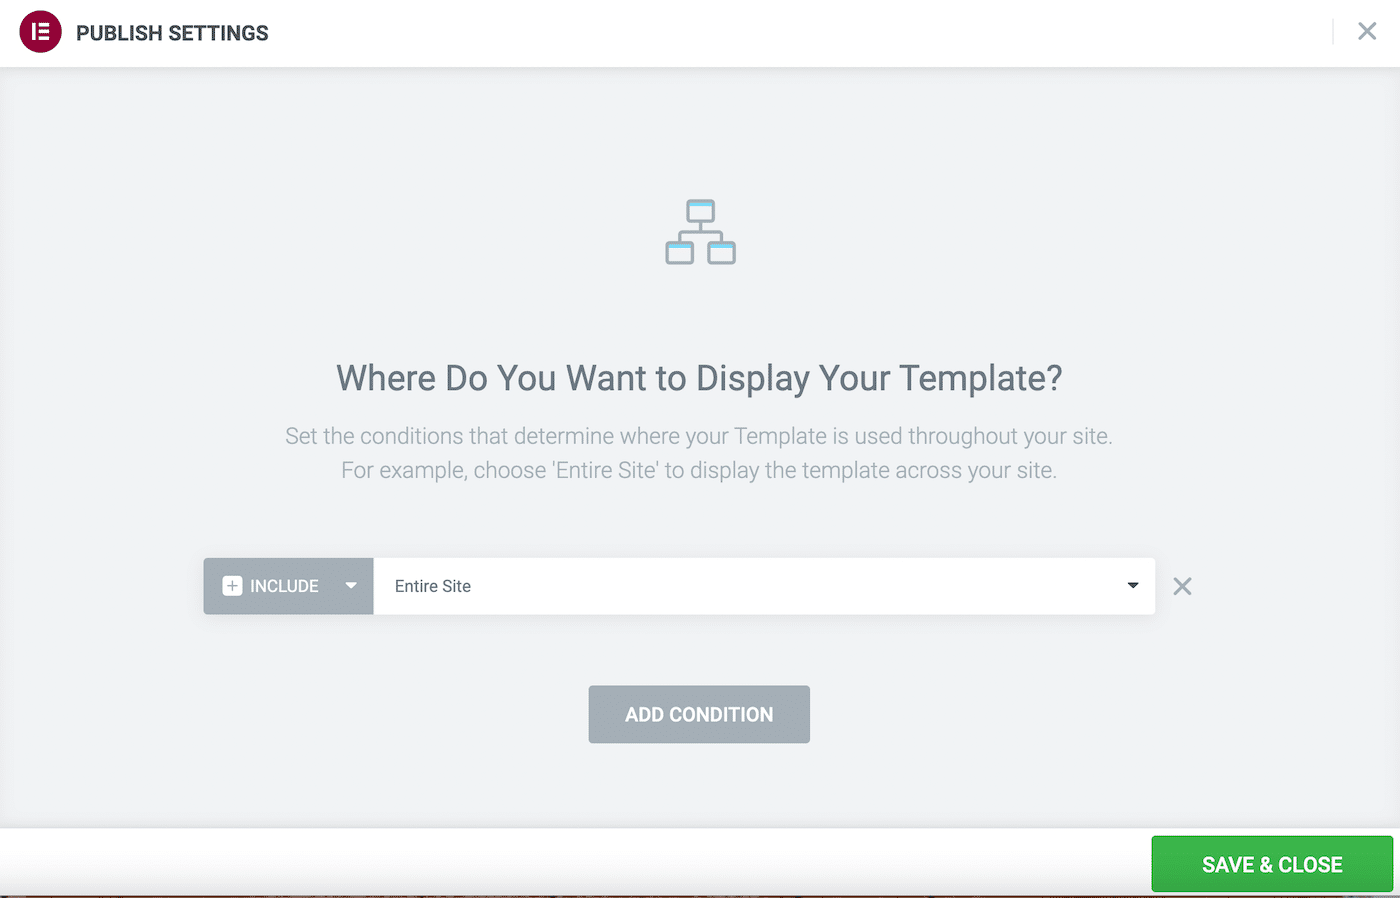 Select where you want to display the template